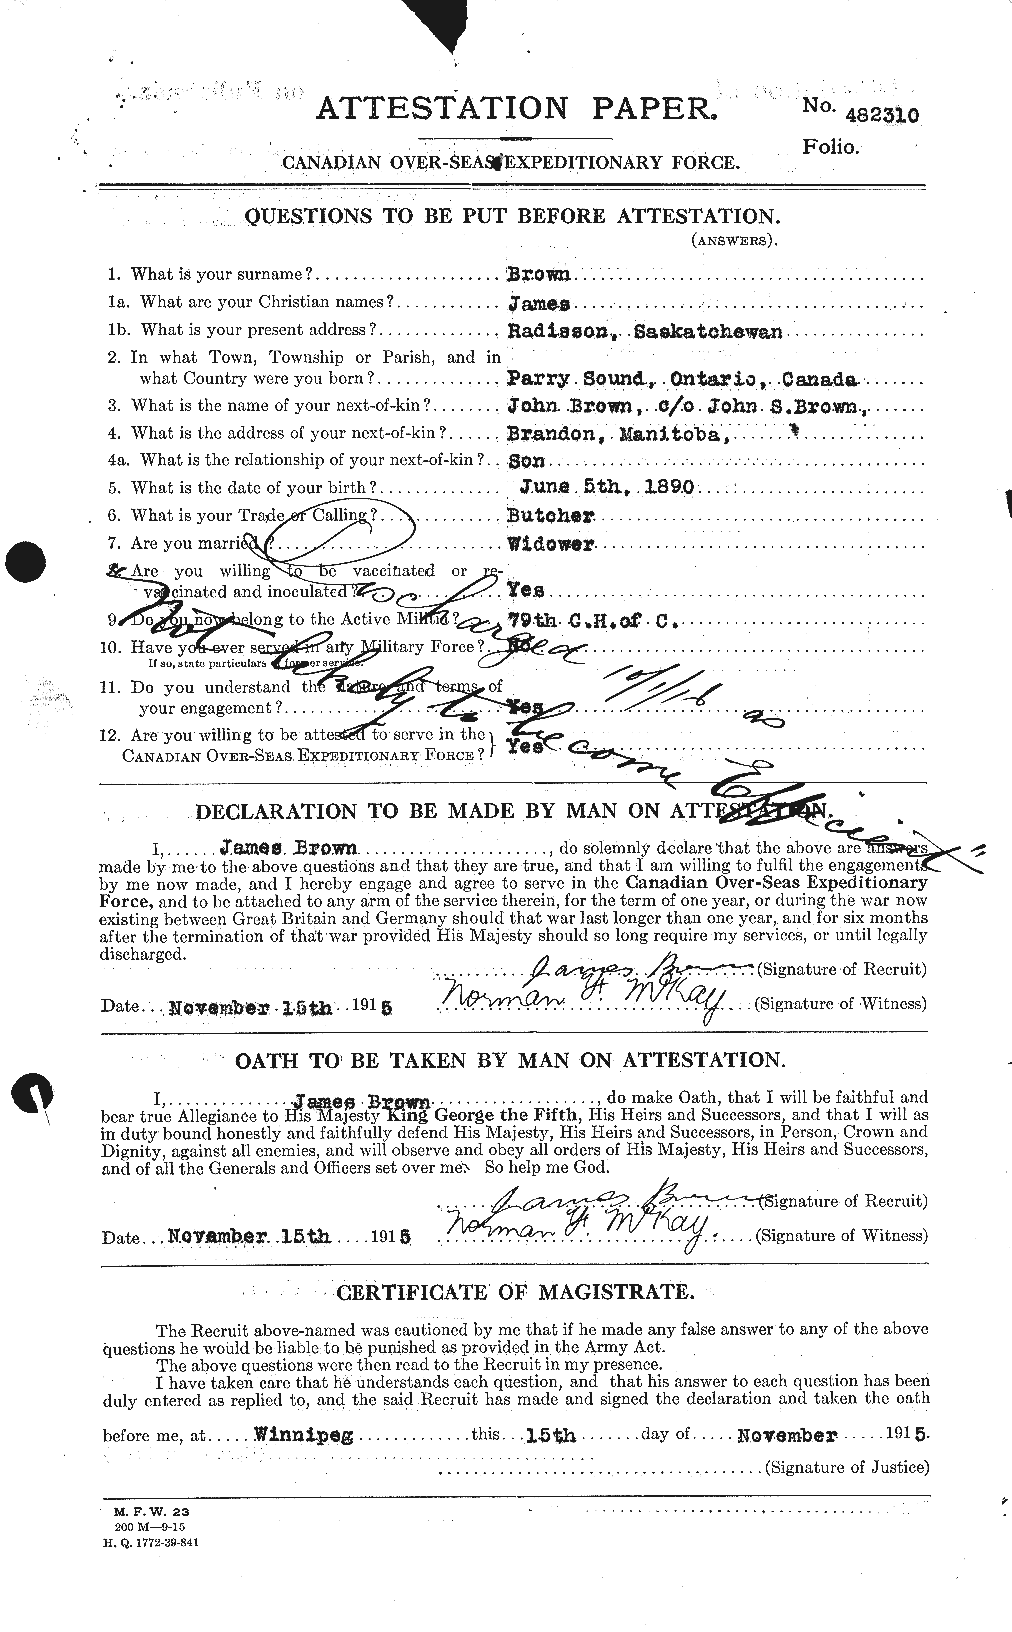 Personnel Records of the First World War - CEF 265764a